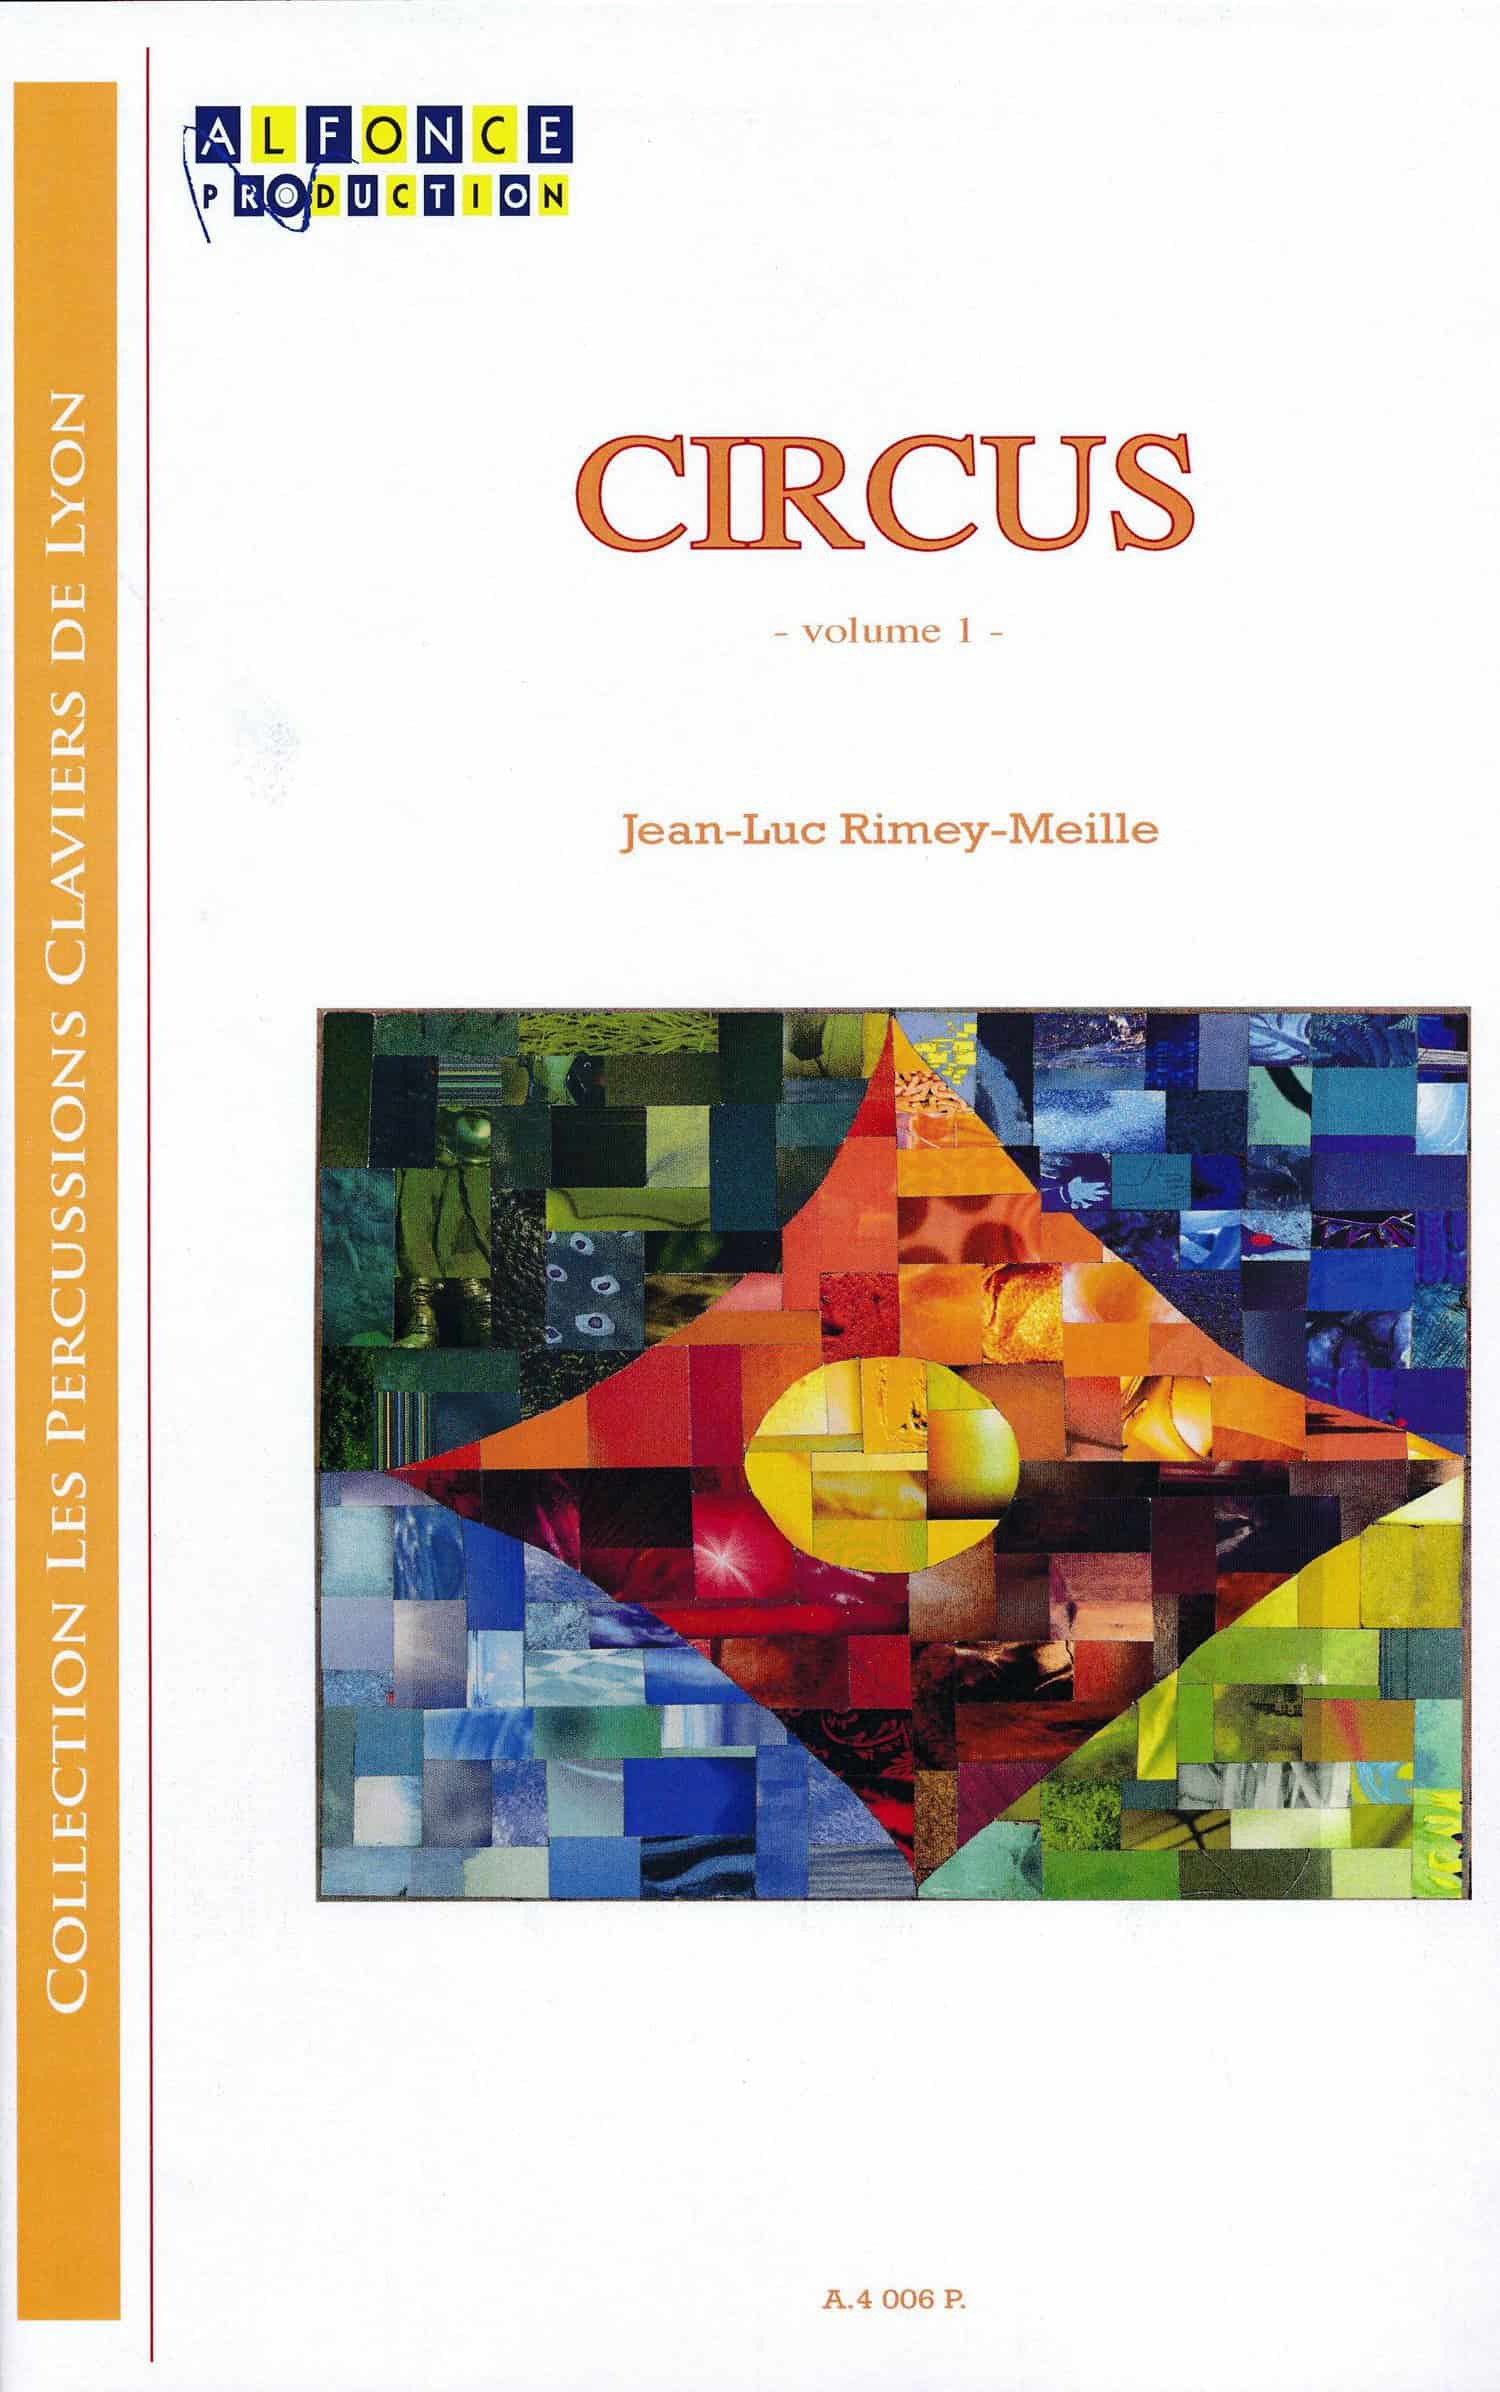 Circus - volume 1 by Jean-Luc Rimey-Meille